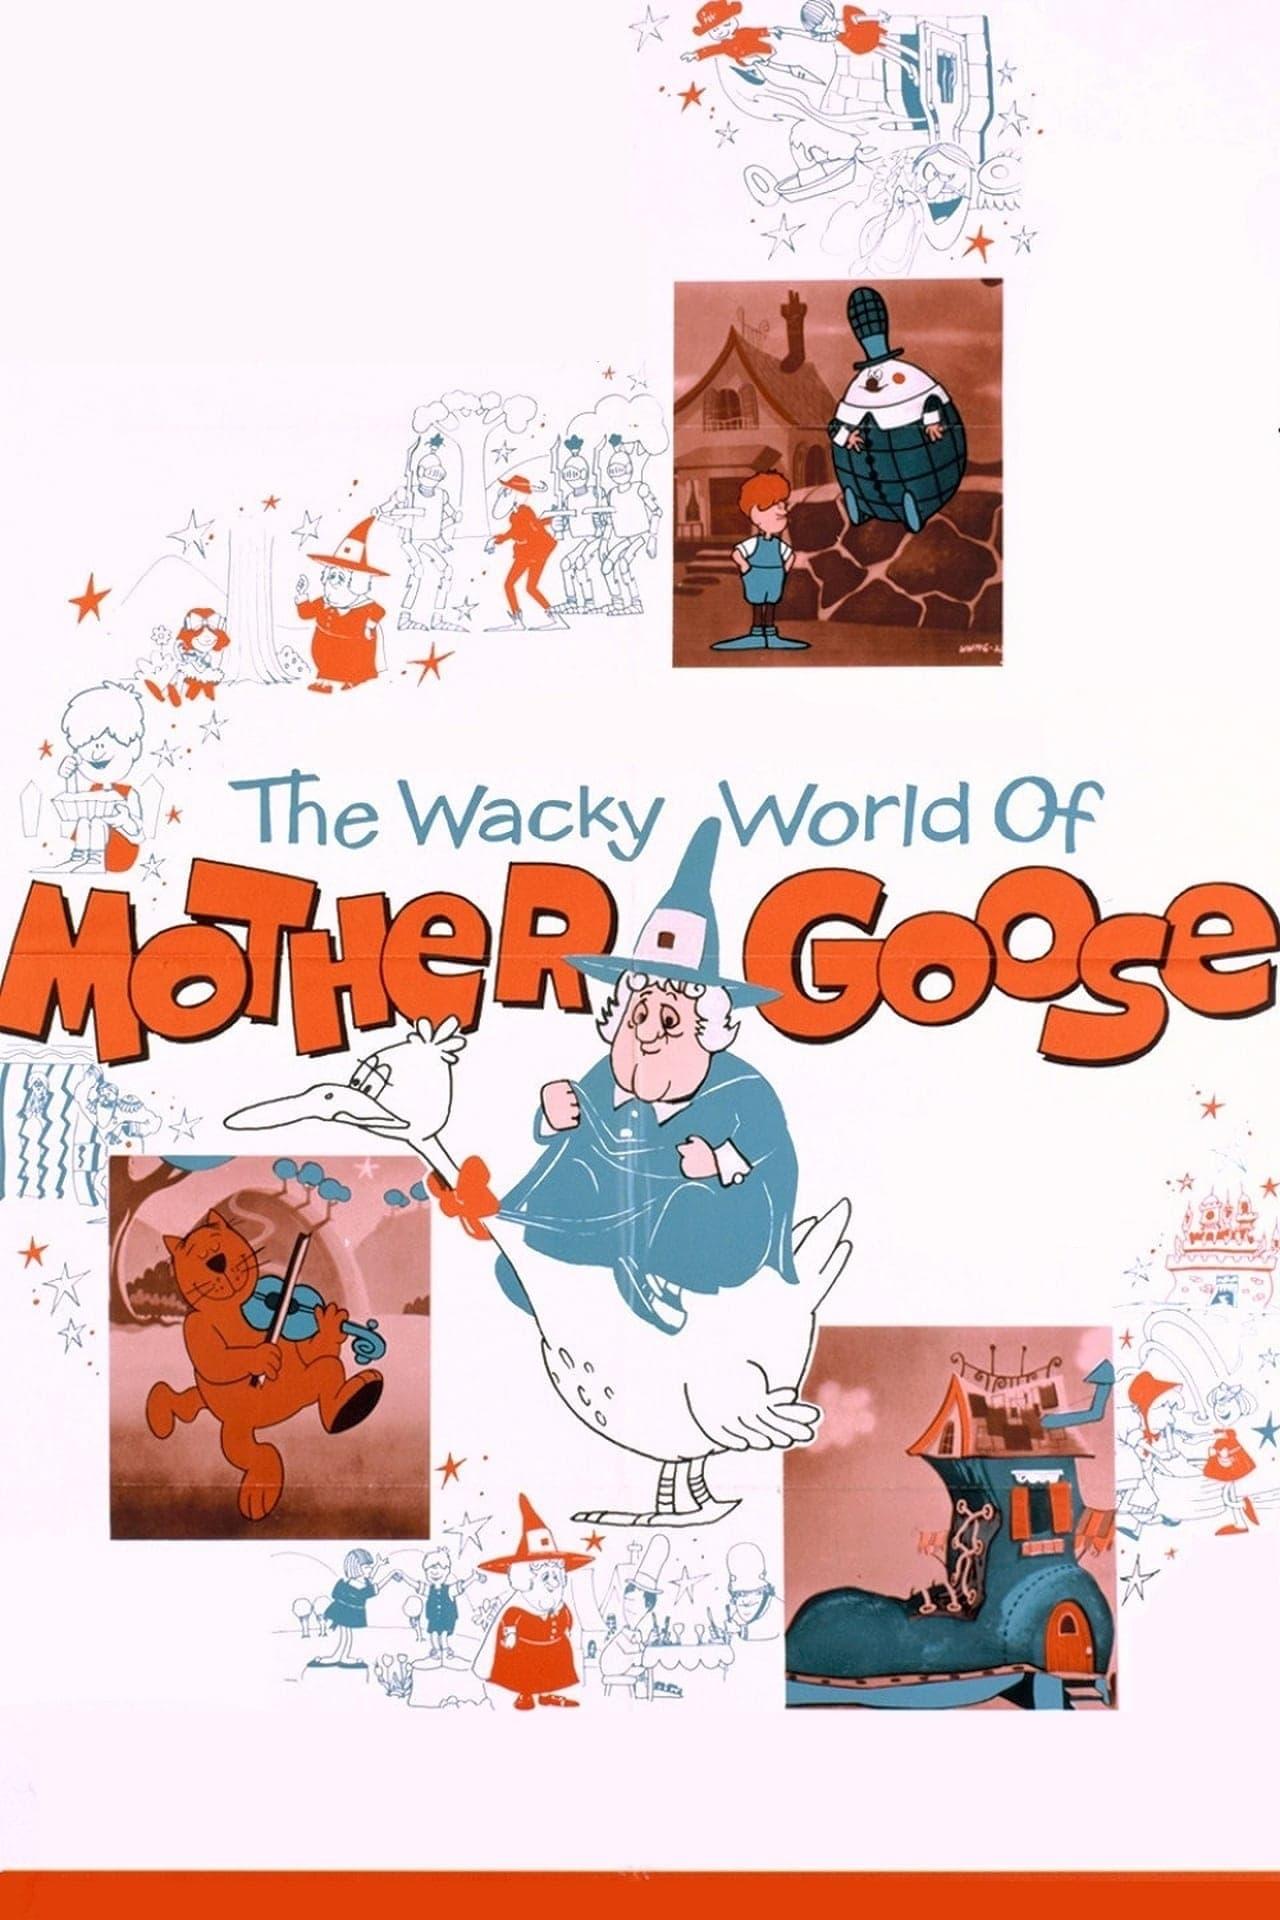 The Wacky World of Mother Goose poster